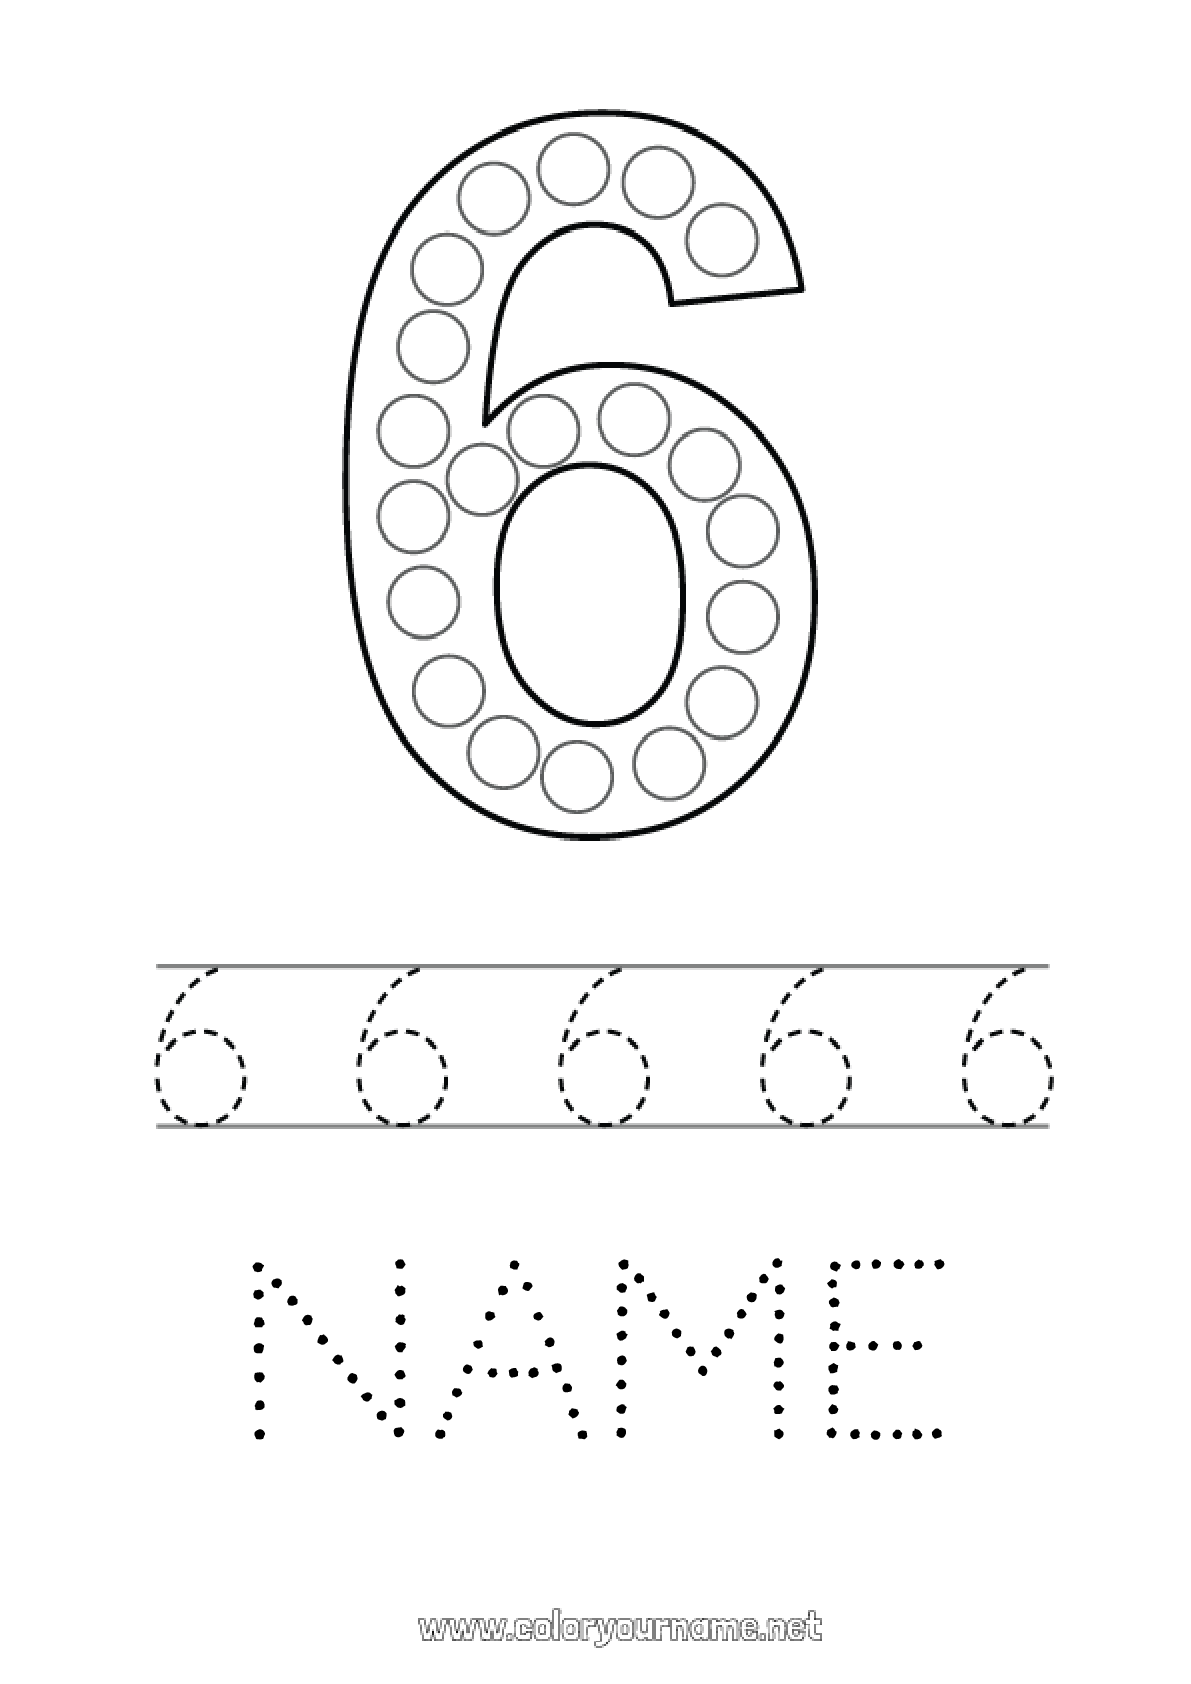 coloring-page-no-1347-number-children-s-activities-dot-markers